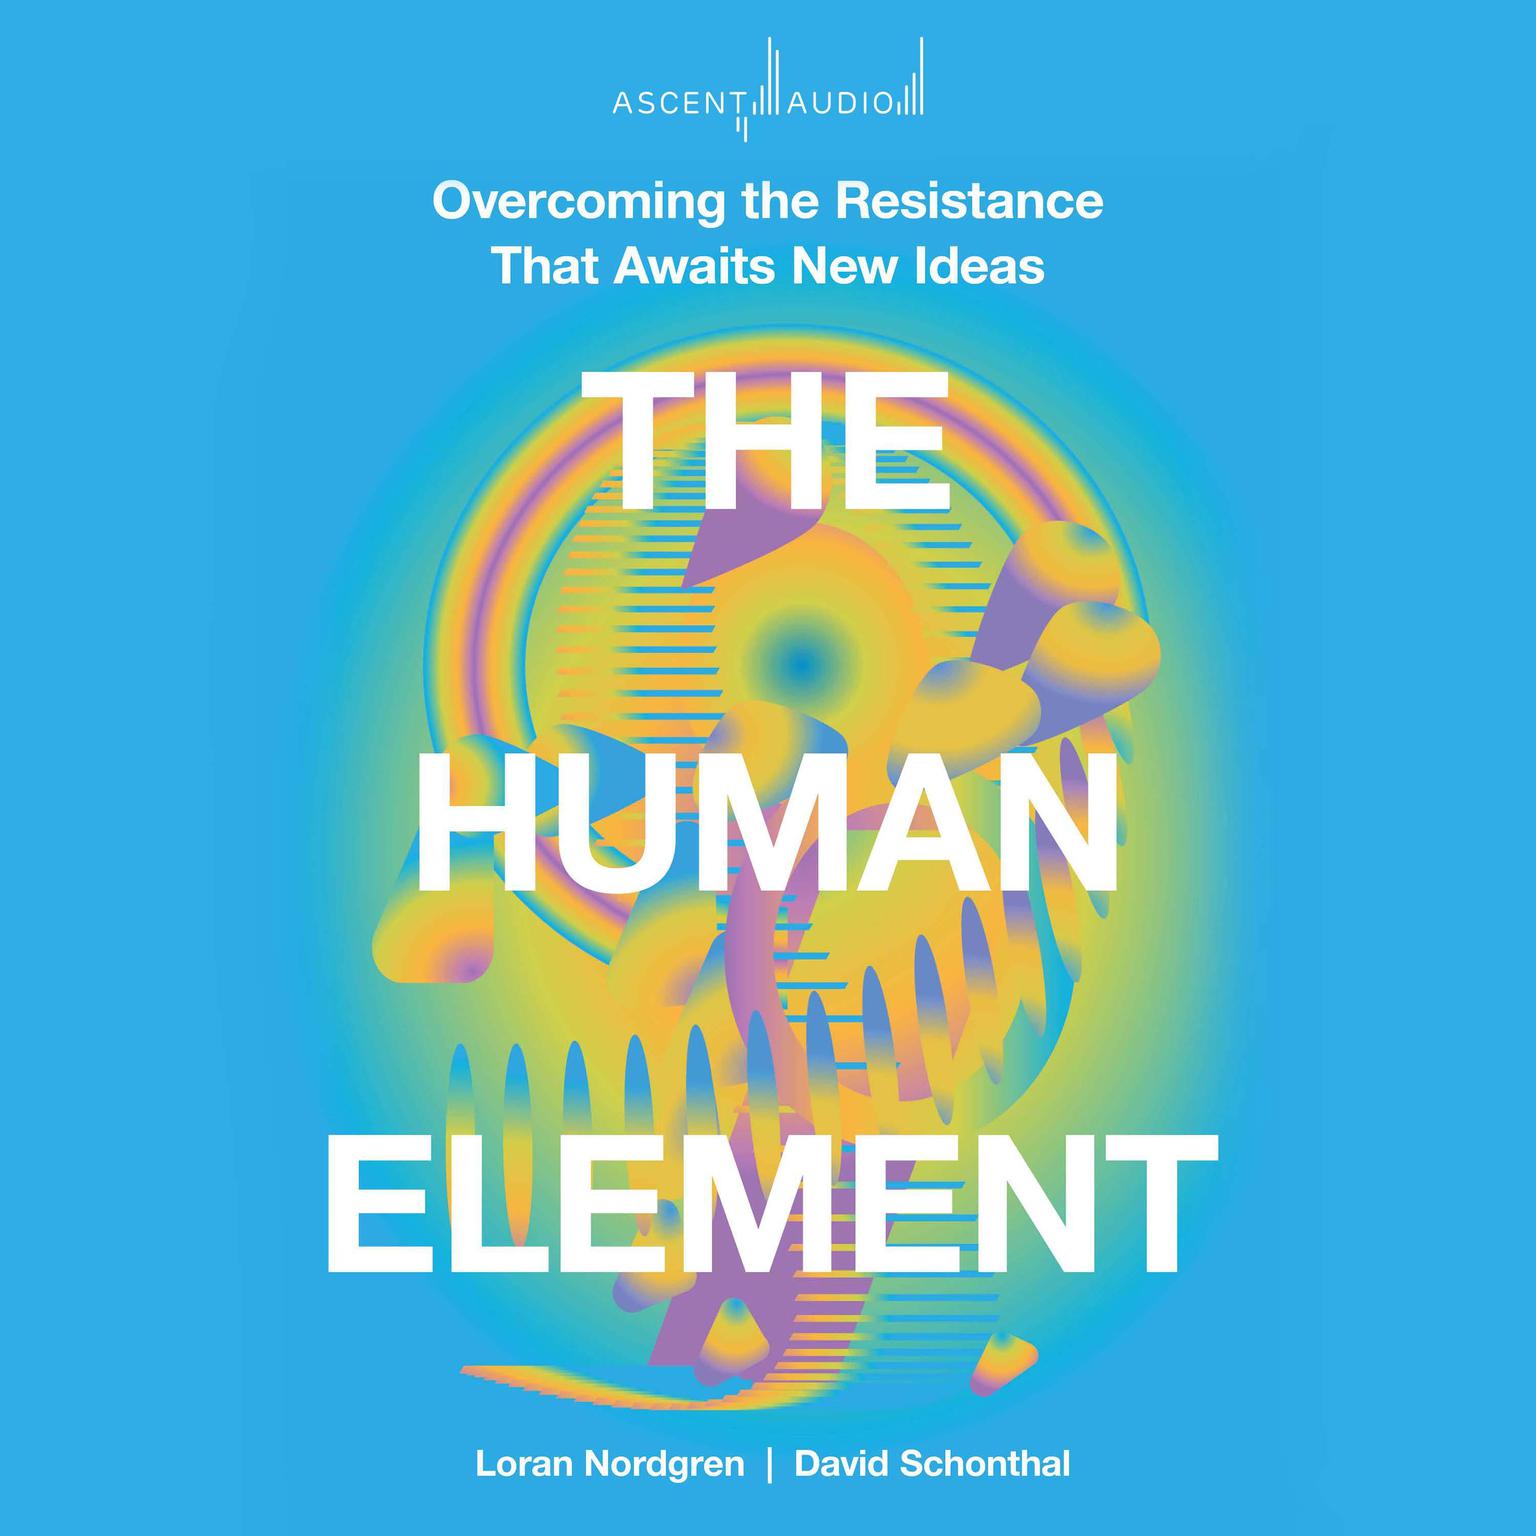 The Human Element: Overcoming the Resistance That Awaits New Ideas  Audiobook, by David Schonthal